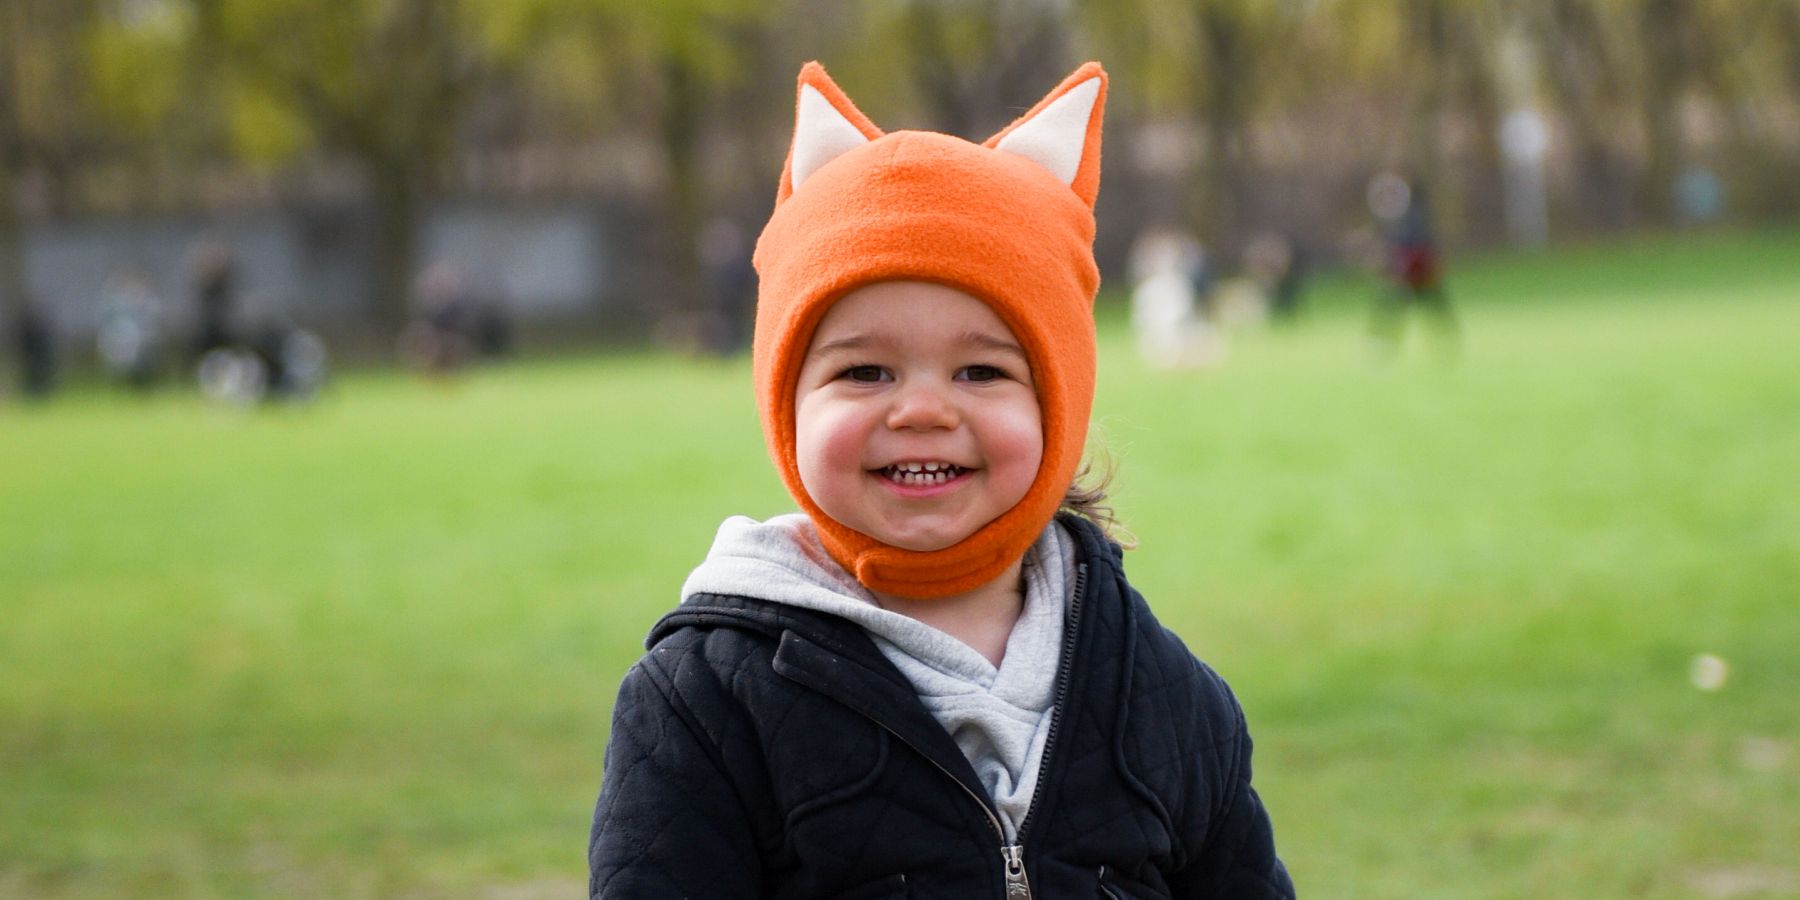 Shop all Kids Fall/Winter hats from linen bonnets to polartec fleece for the coldest of day-made in canada